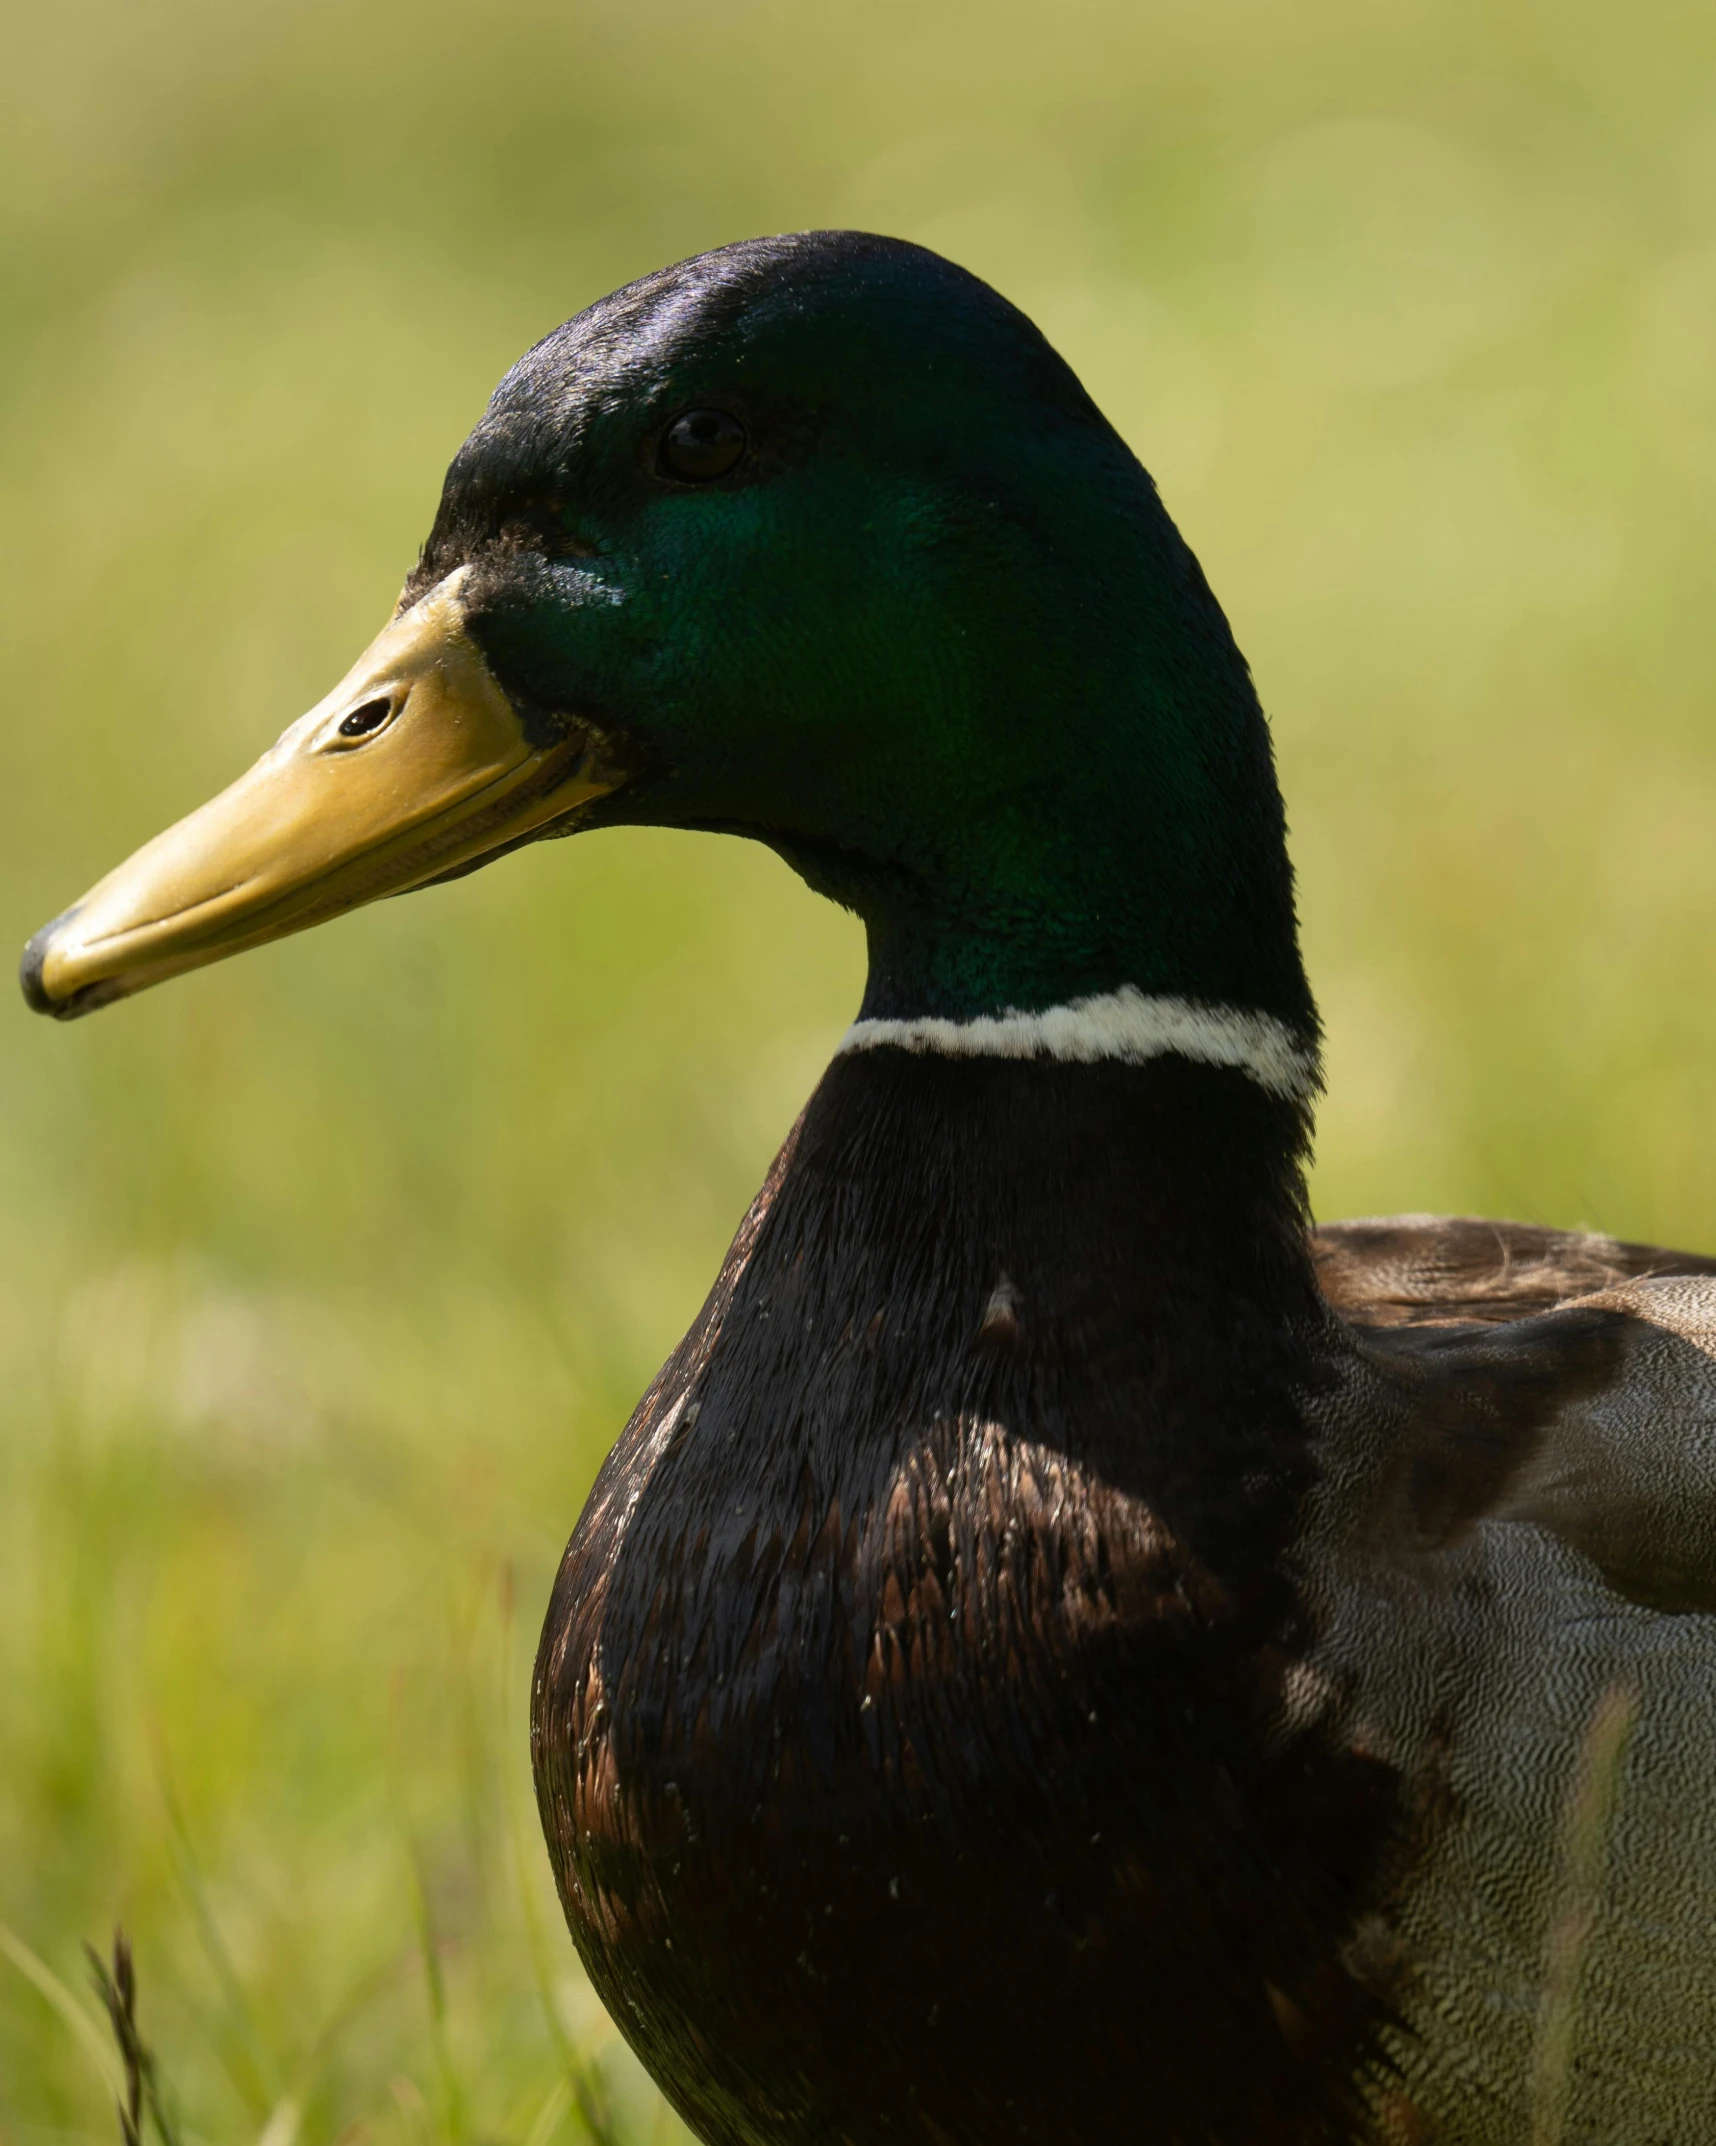 an image of a duck in the wild